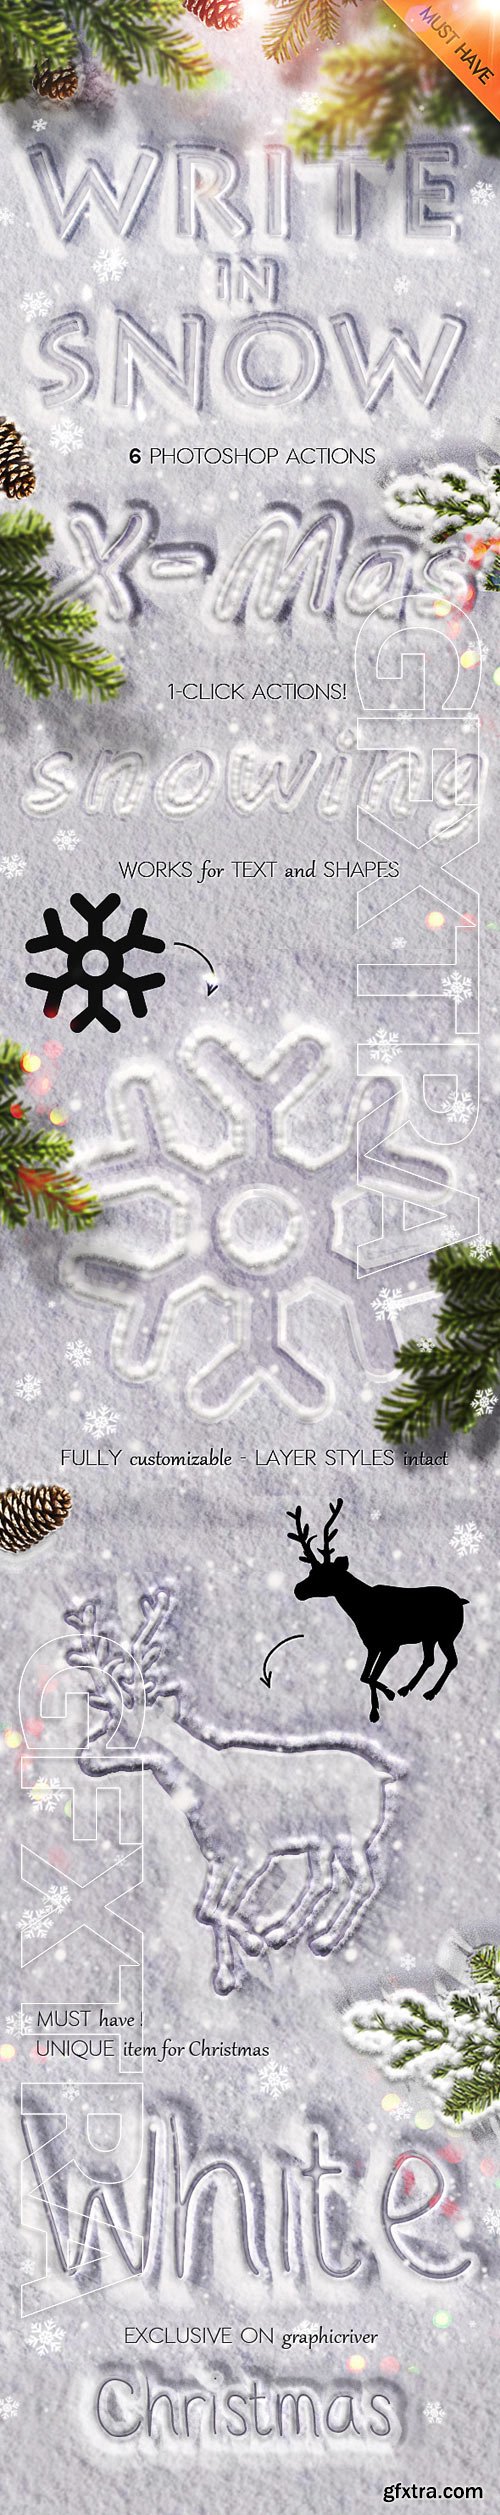 GraphicRiver - Snow Writing Photoshop Actions for Winter Time 9442971